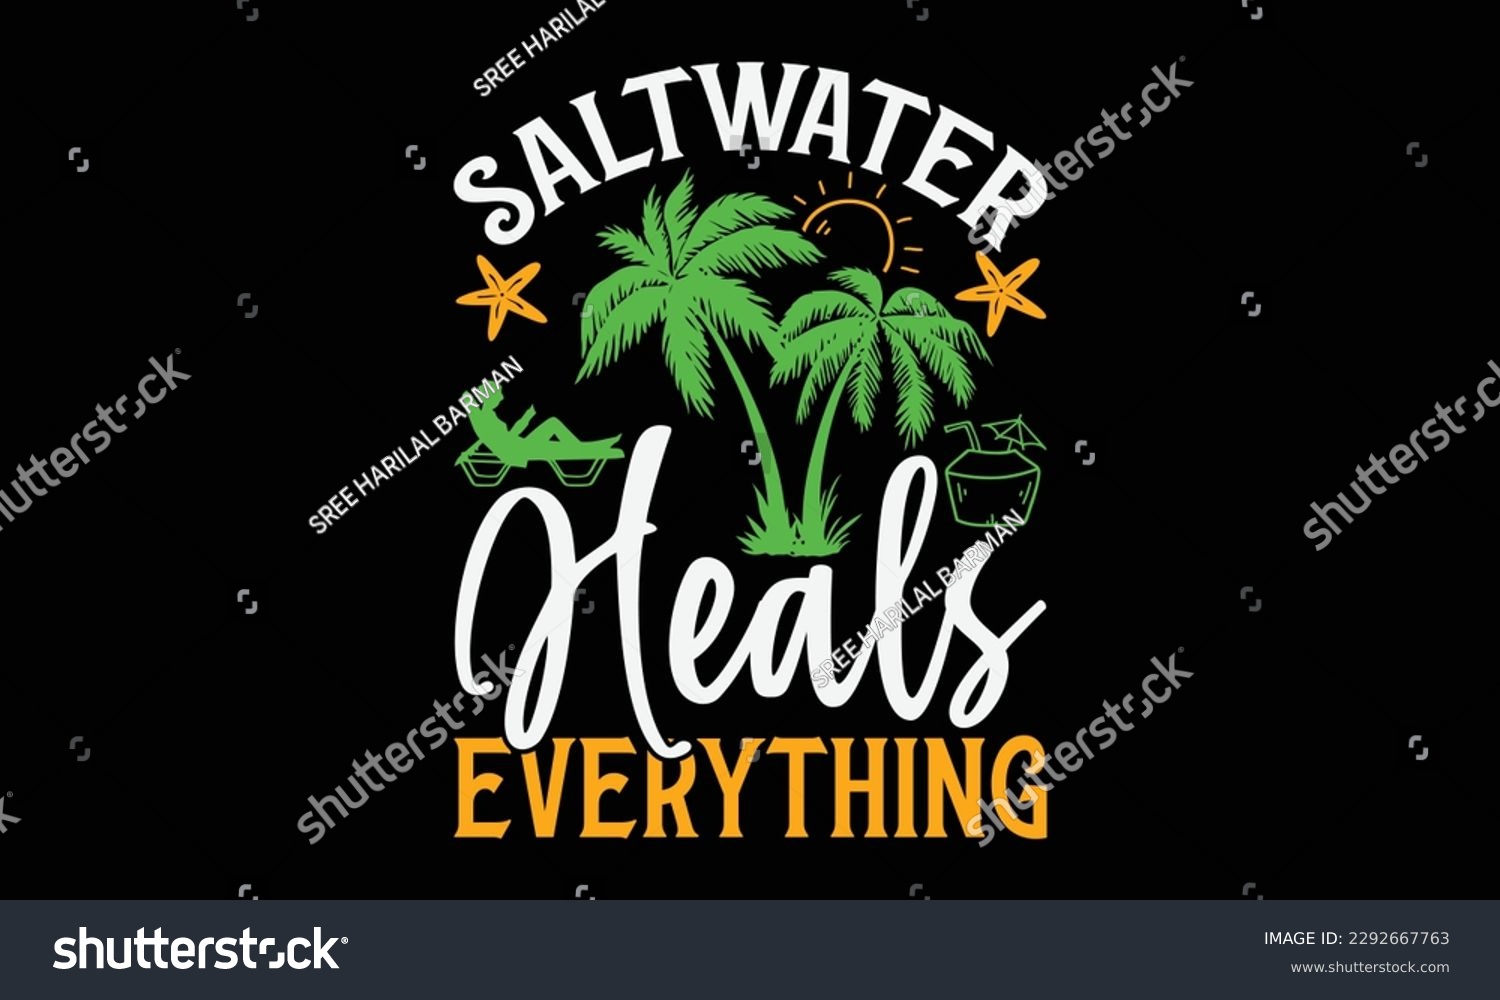 SVG of Saltwater heals everything - Summer Svg typography t-shirt design, Hand drawn lettering phrase, Greeting cards, templates, mugs, templates, brochures, posters, labels, stickers, eps 10. svg